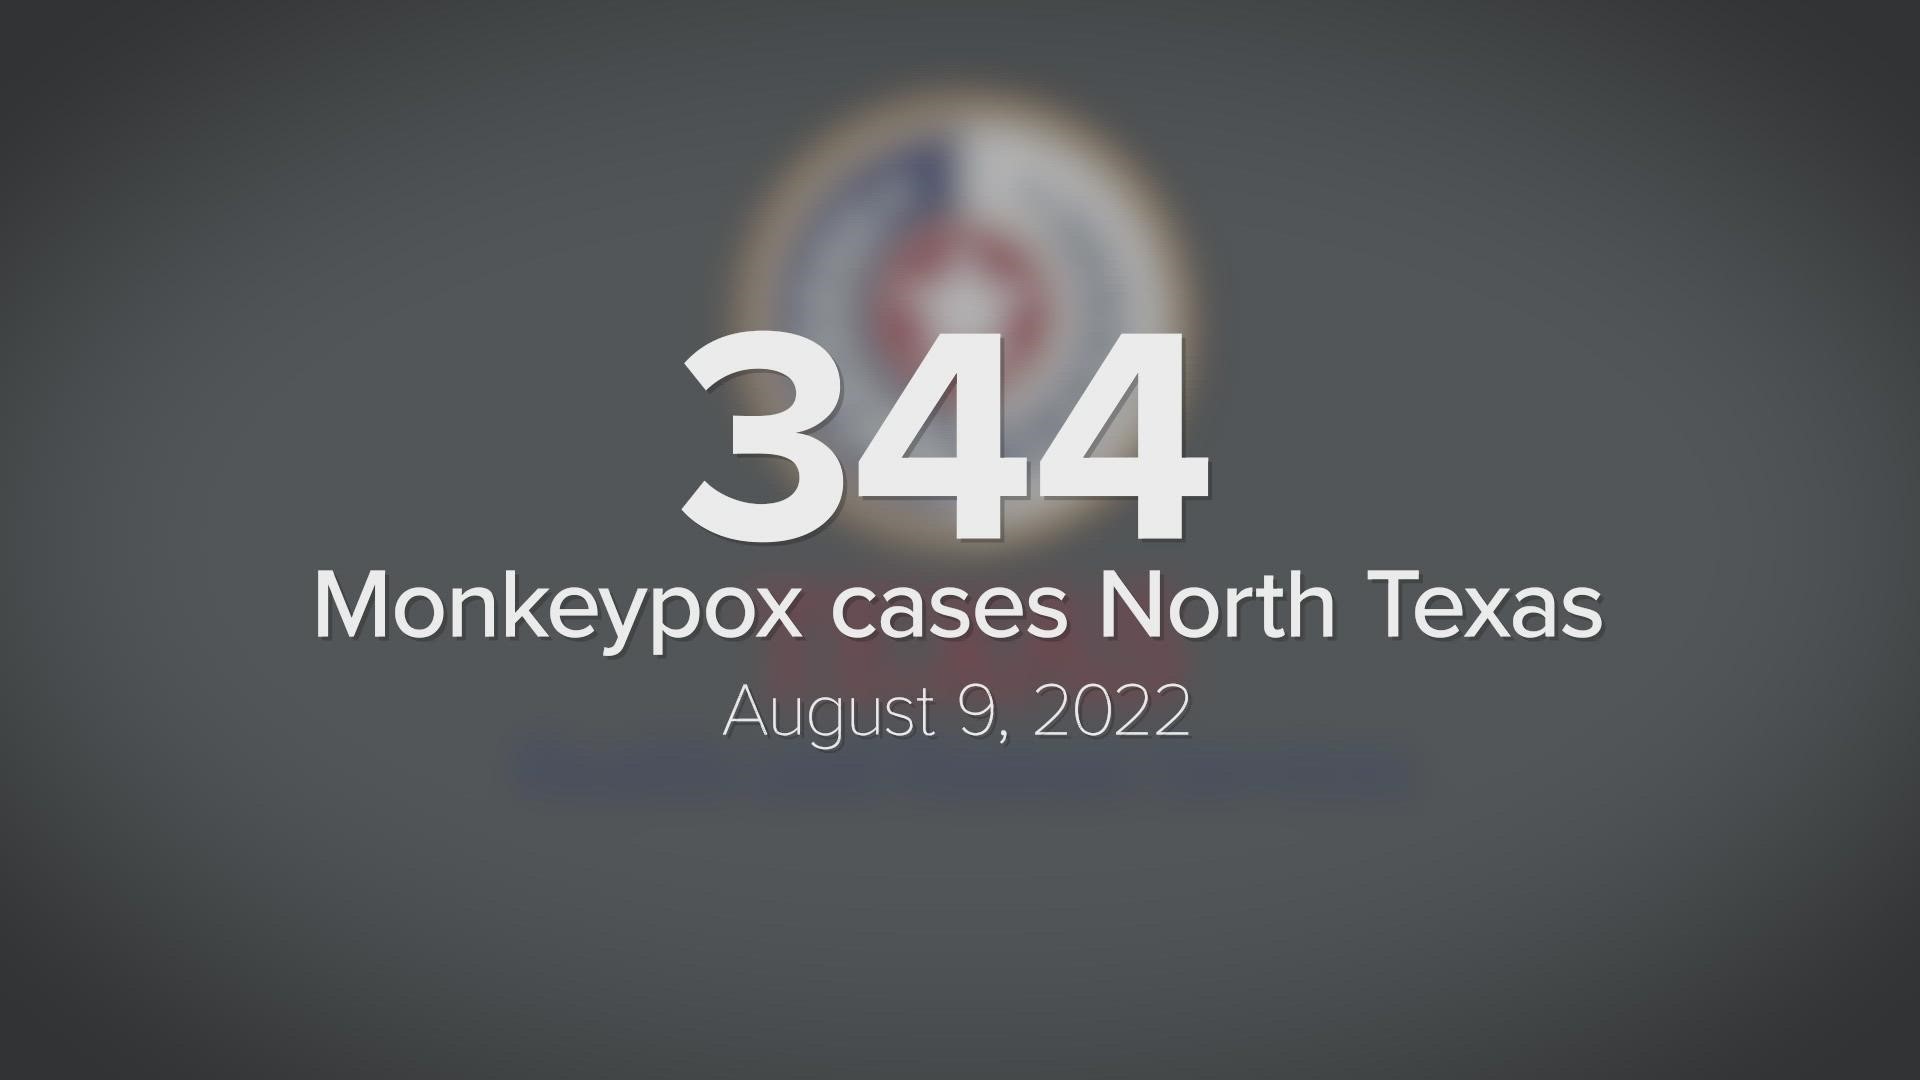 Monkeypox cases are on the rise in Texas.